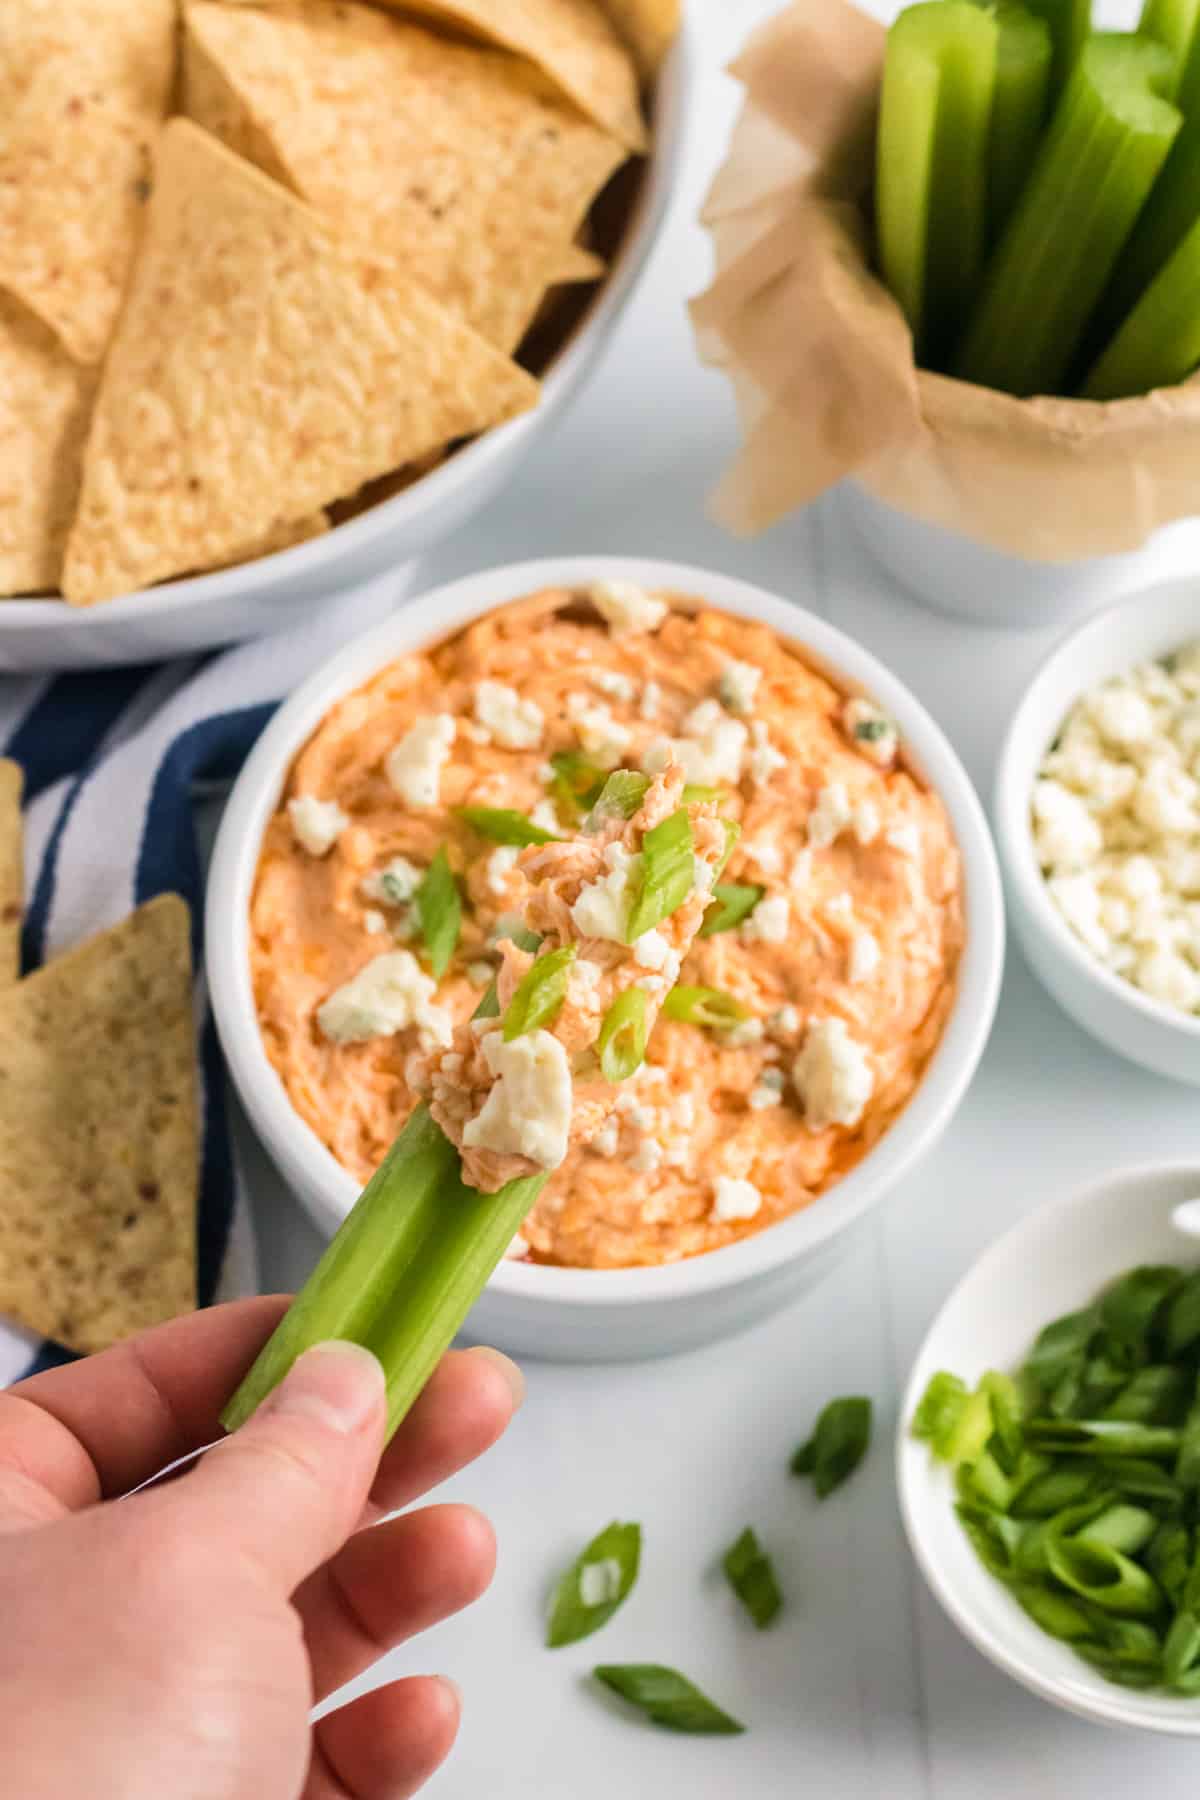 celery stick being dipped in a bowl of cheesy buffalo chicken dip. Tortilla chips, more celery sticks, blue cheese crumbles, and scallions are in background